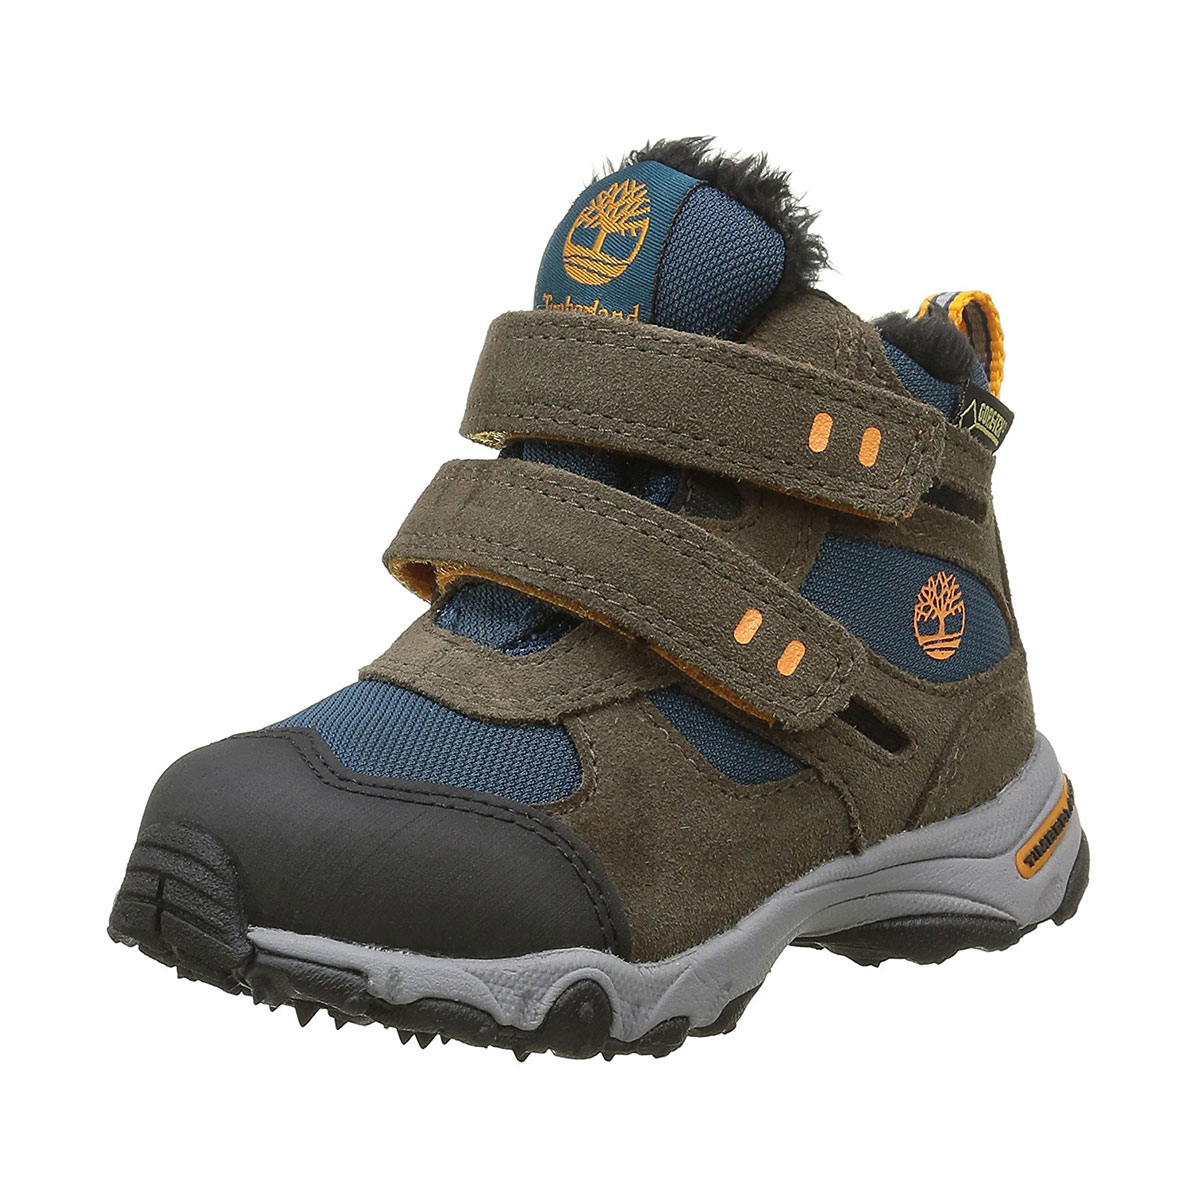 Timberland Ossipee 2 Strap Gore-Tex brown  A1A4T